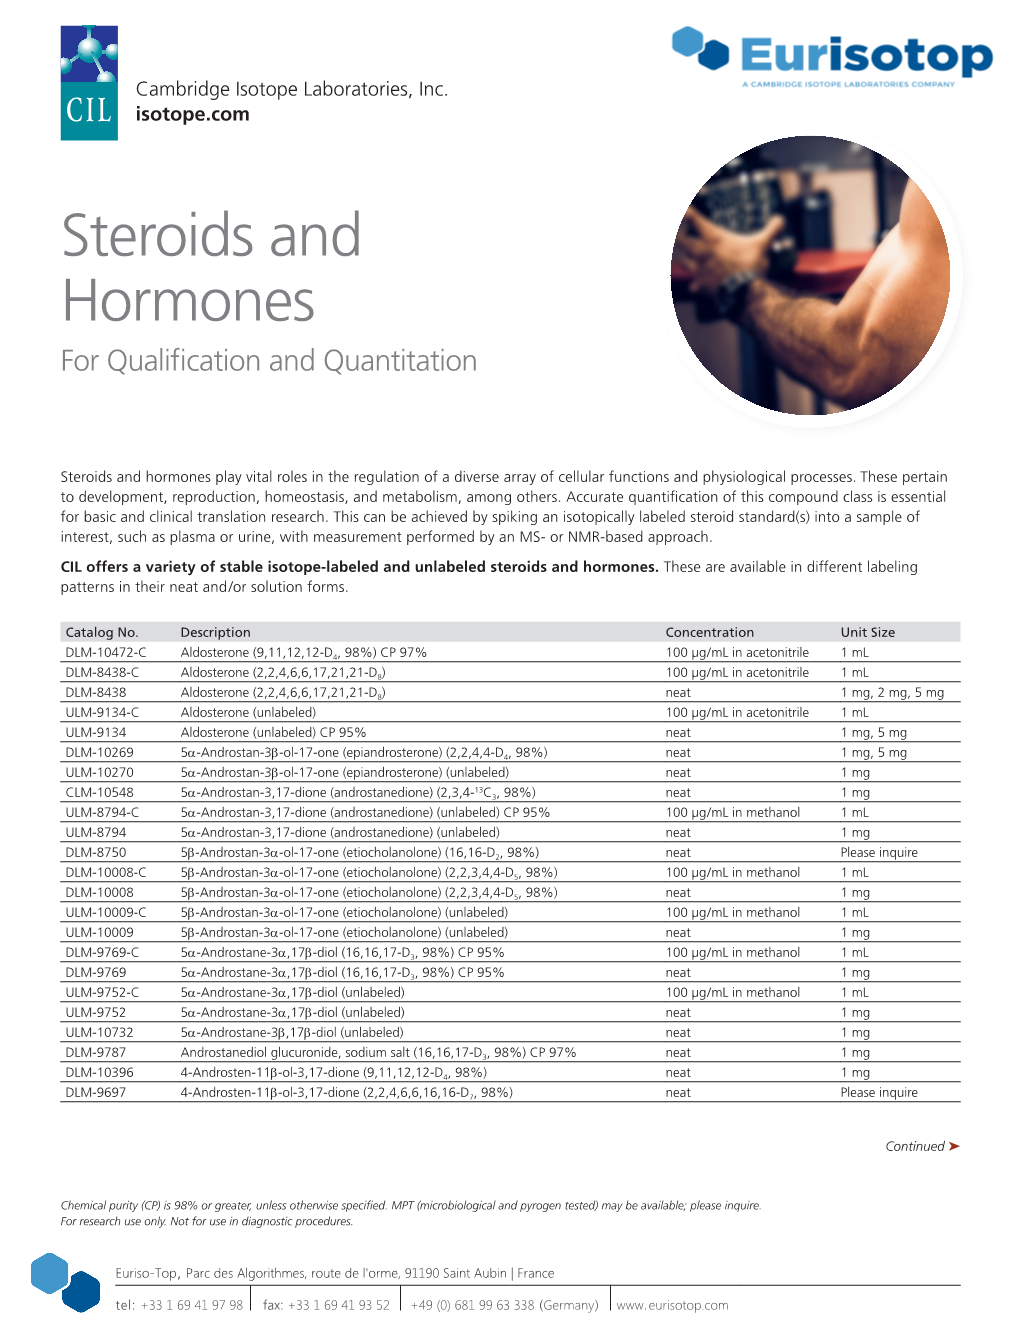 Steroids and Hormones for Qualification and Quantitation